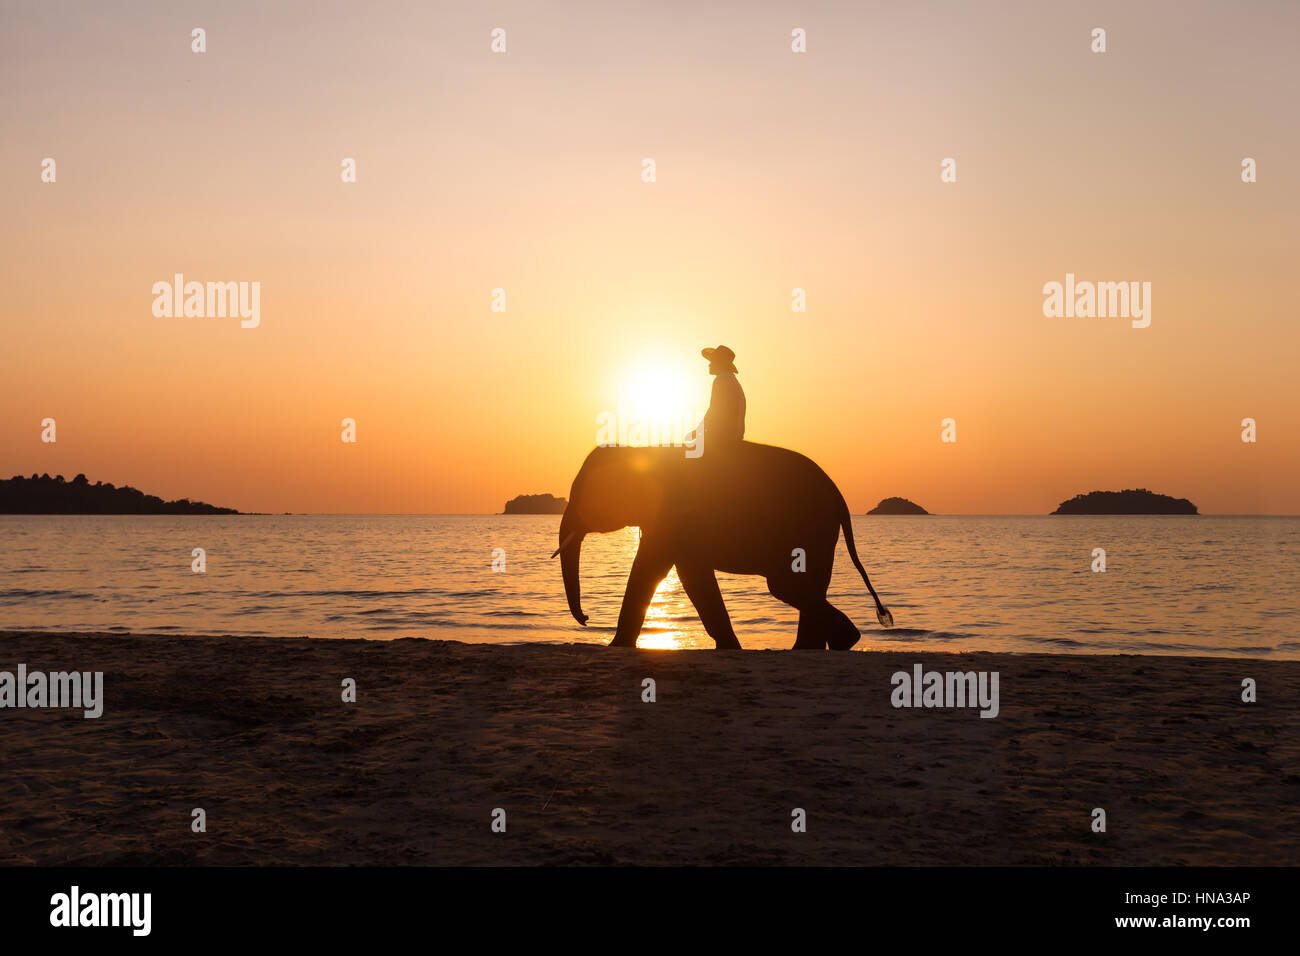 Silhouette of a man riding an asian elephant on a tropical beach at sunset Stock Photo